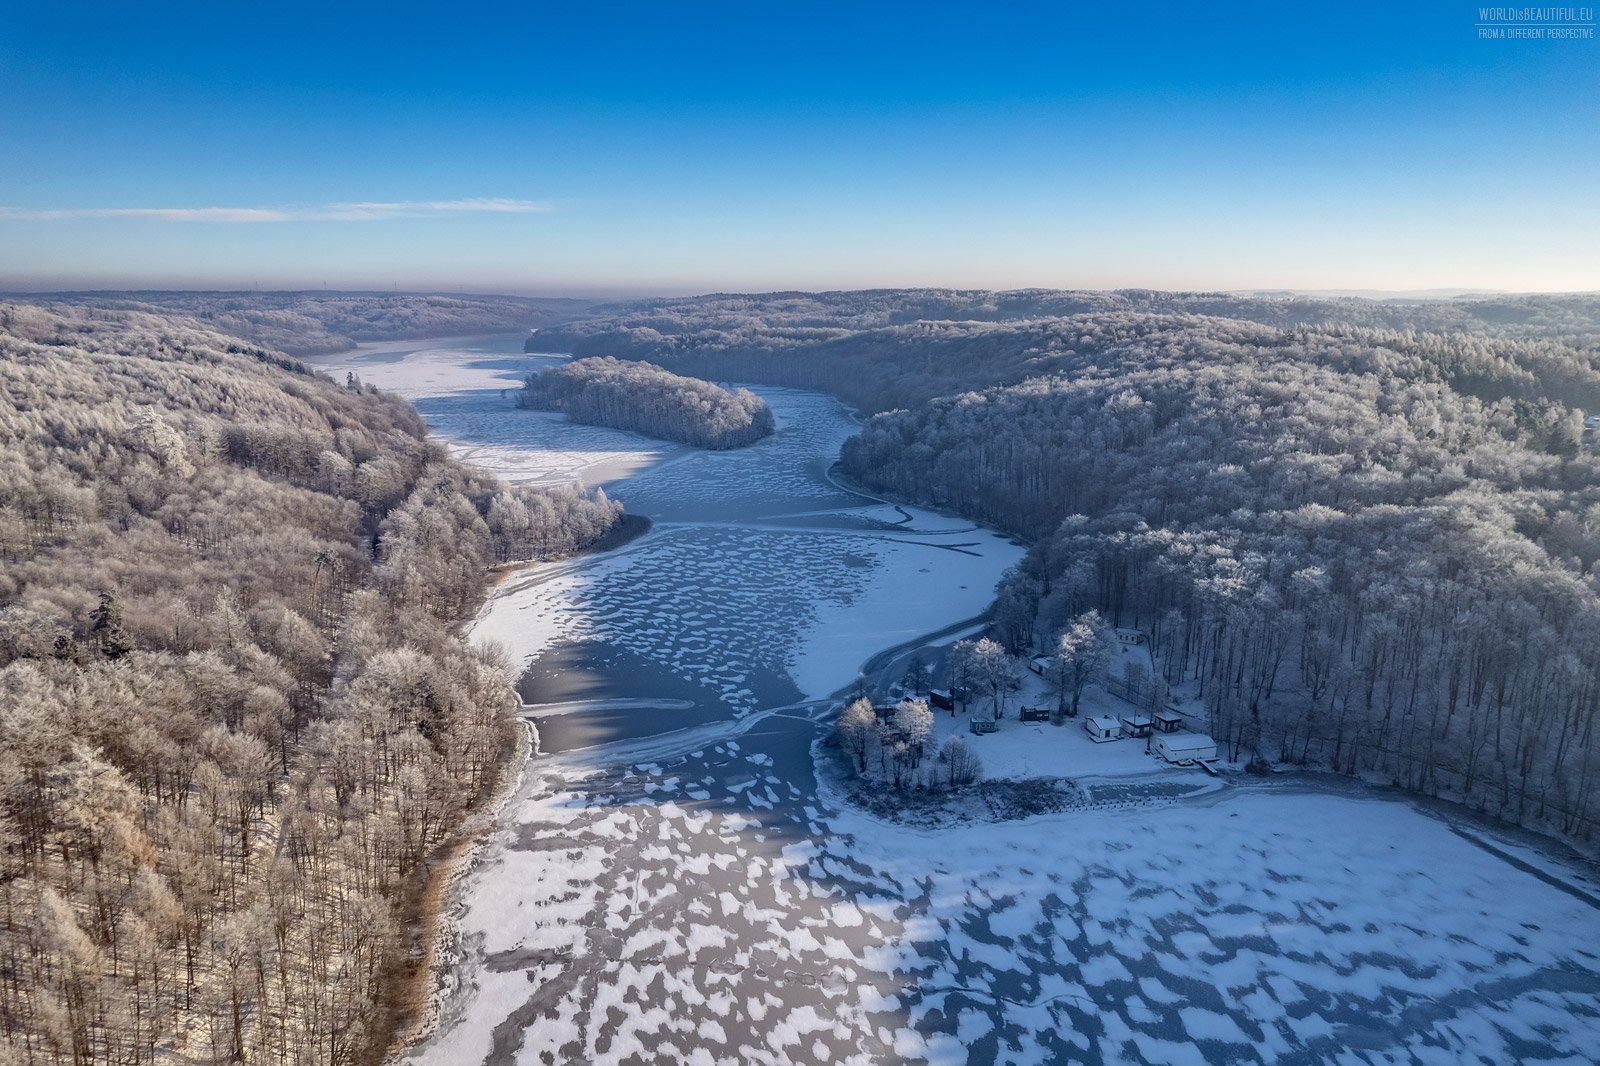 Shooting with a drone in winter